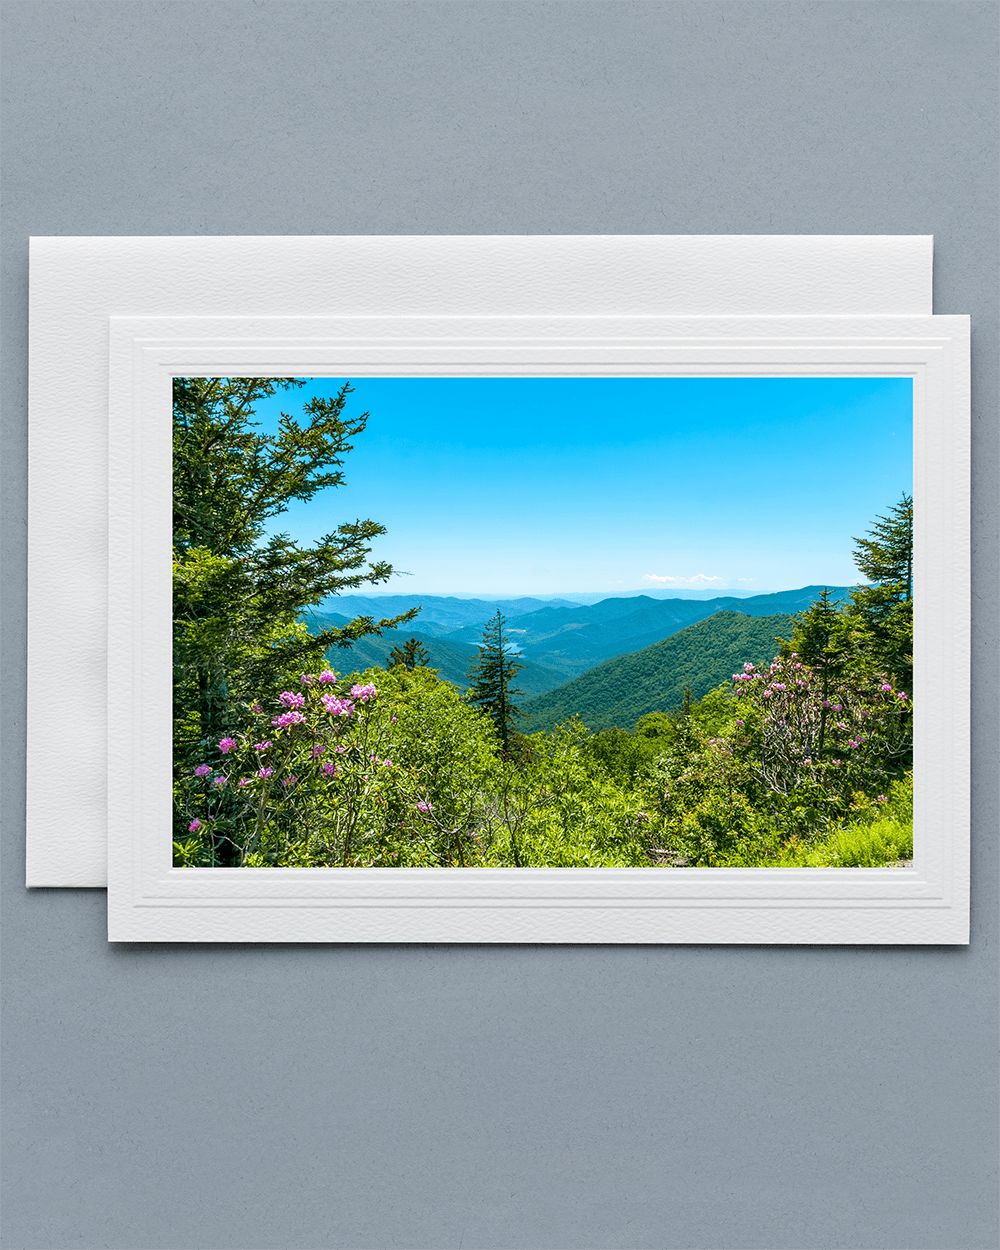 Lavilo™ Greeting Cards - Front Side - View from the Blue Ridge Parkway at Spring